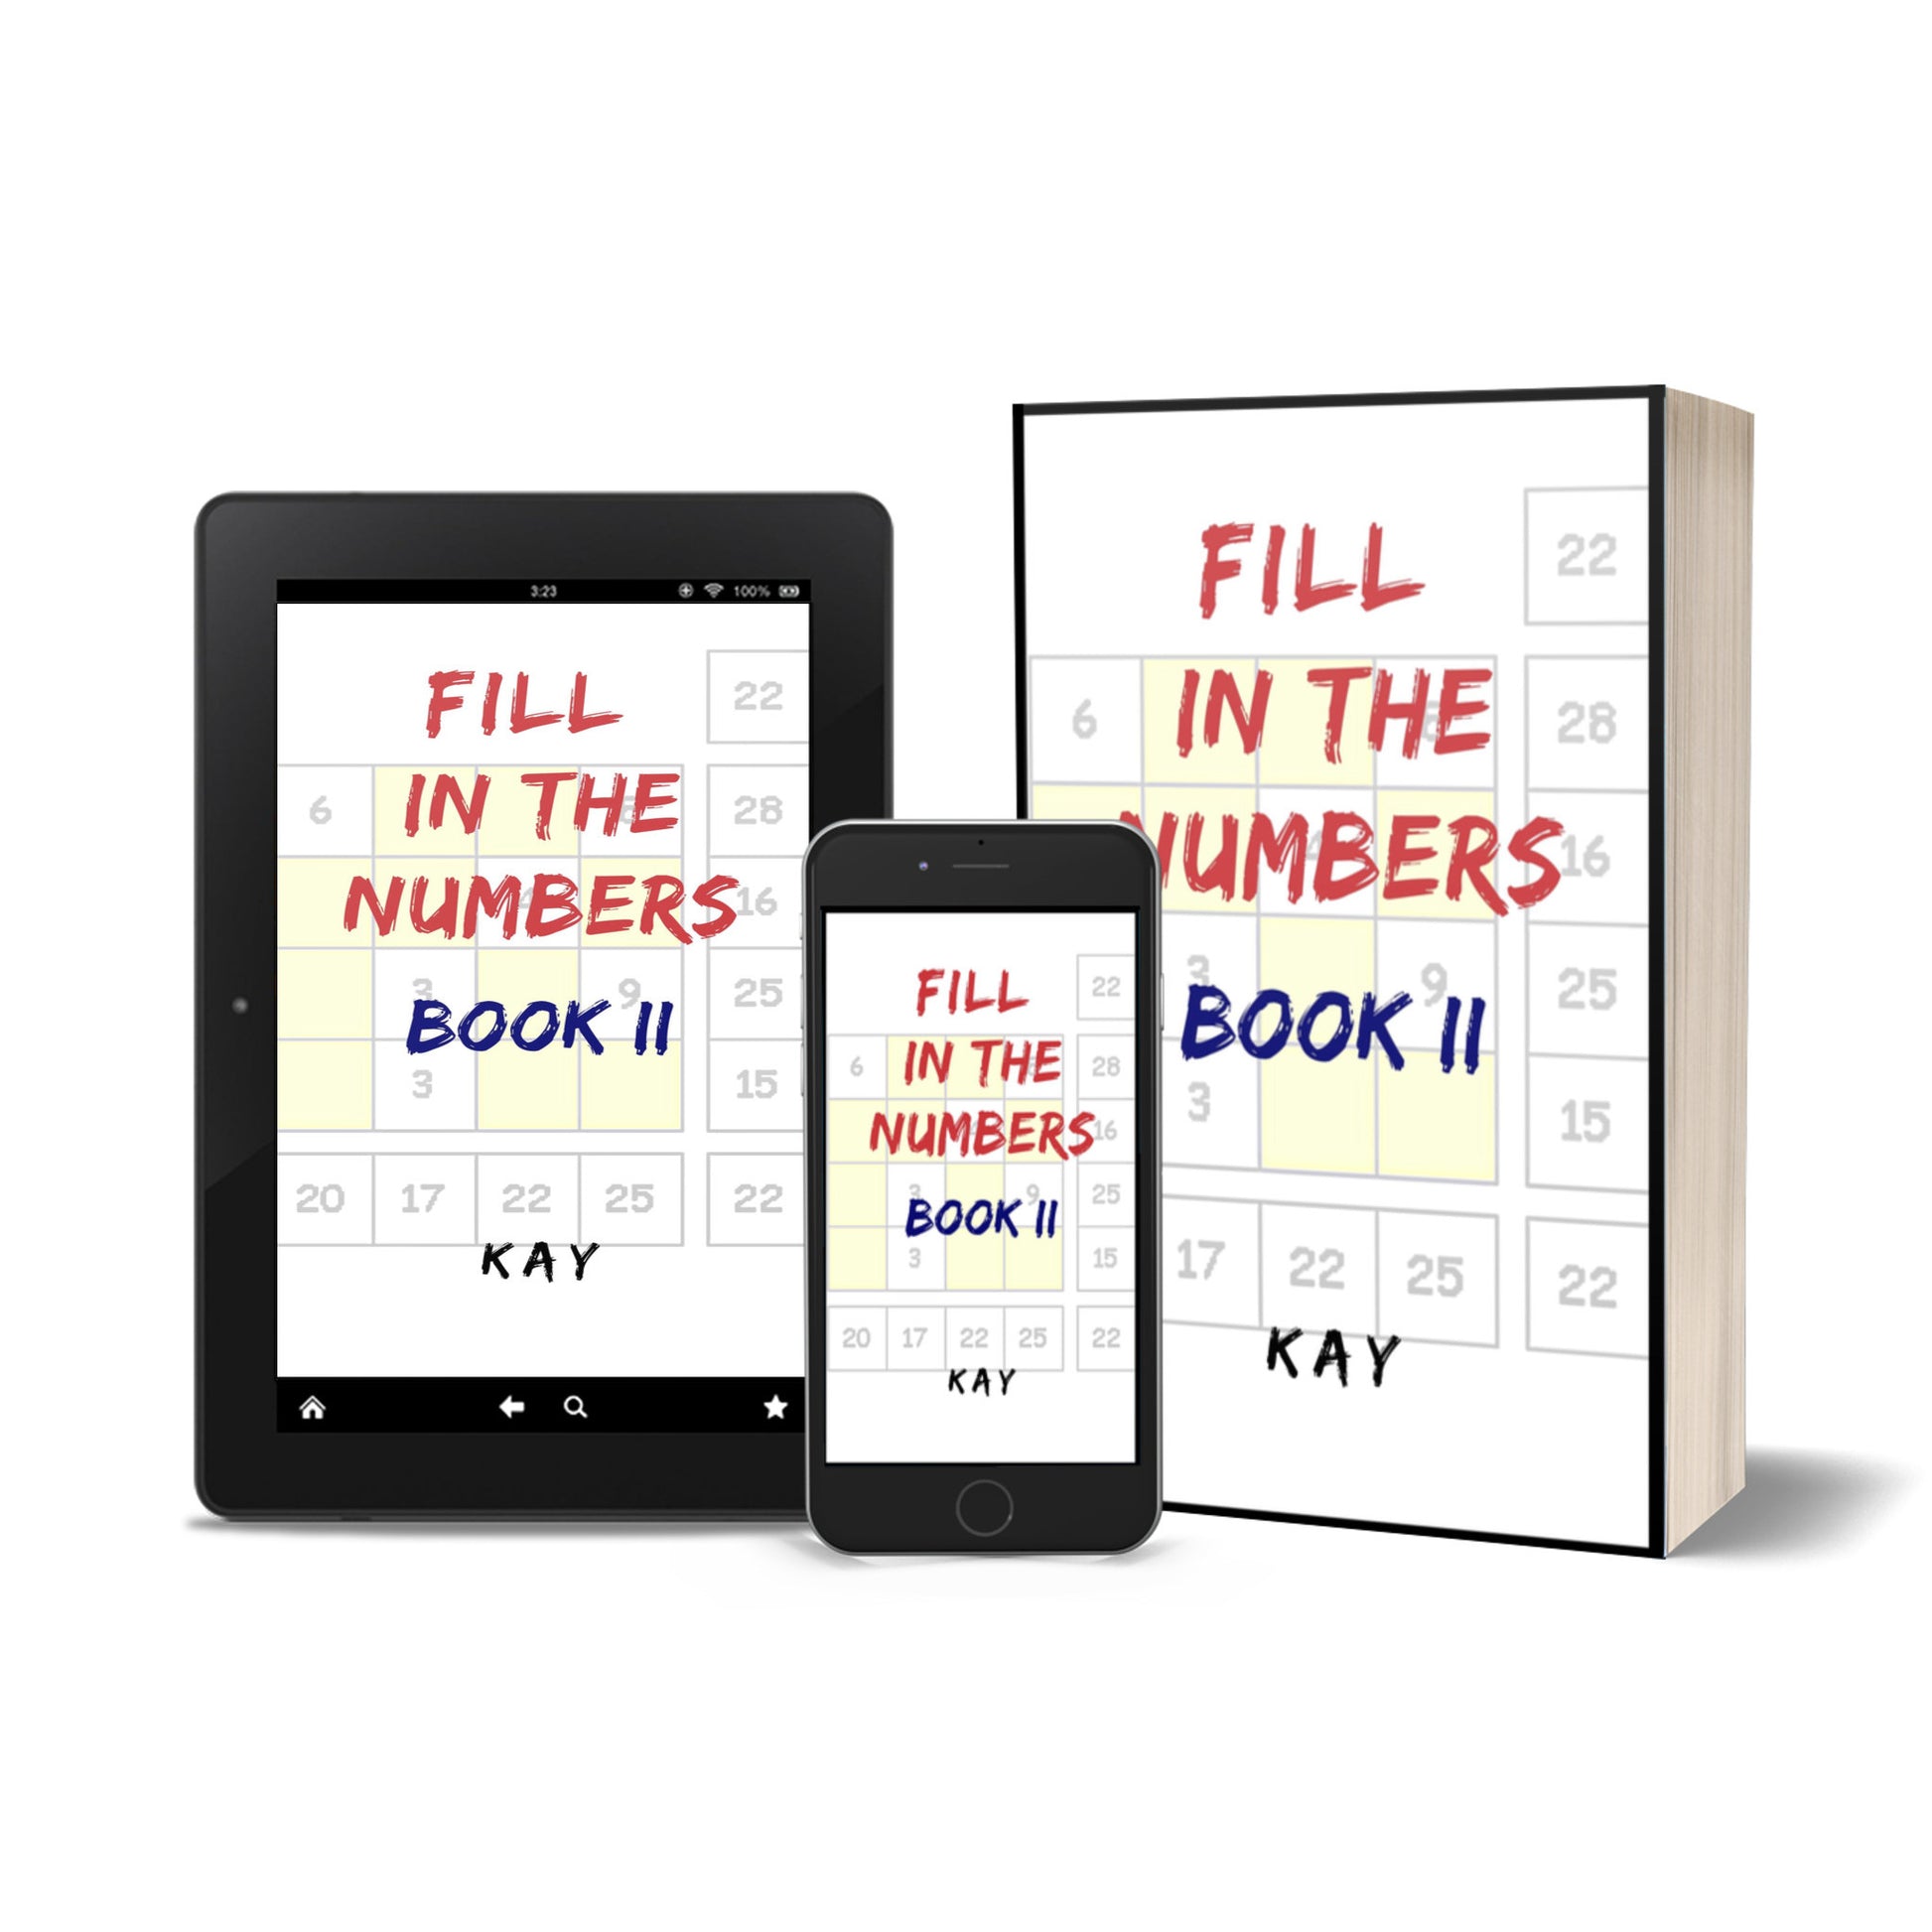 Fill in the Numbers Book II Digital Download